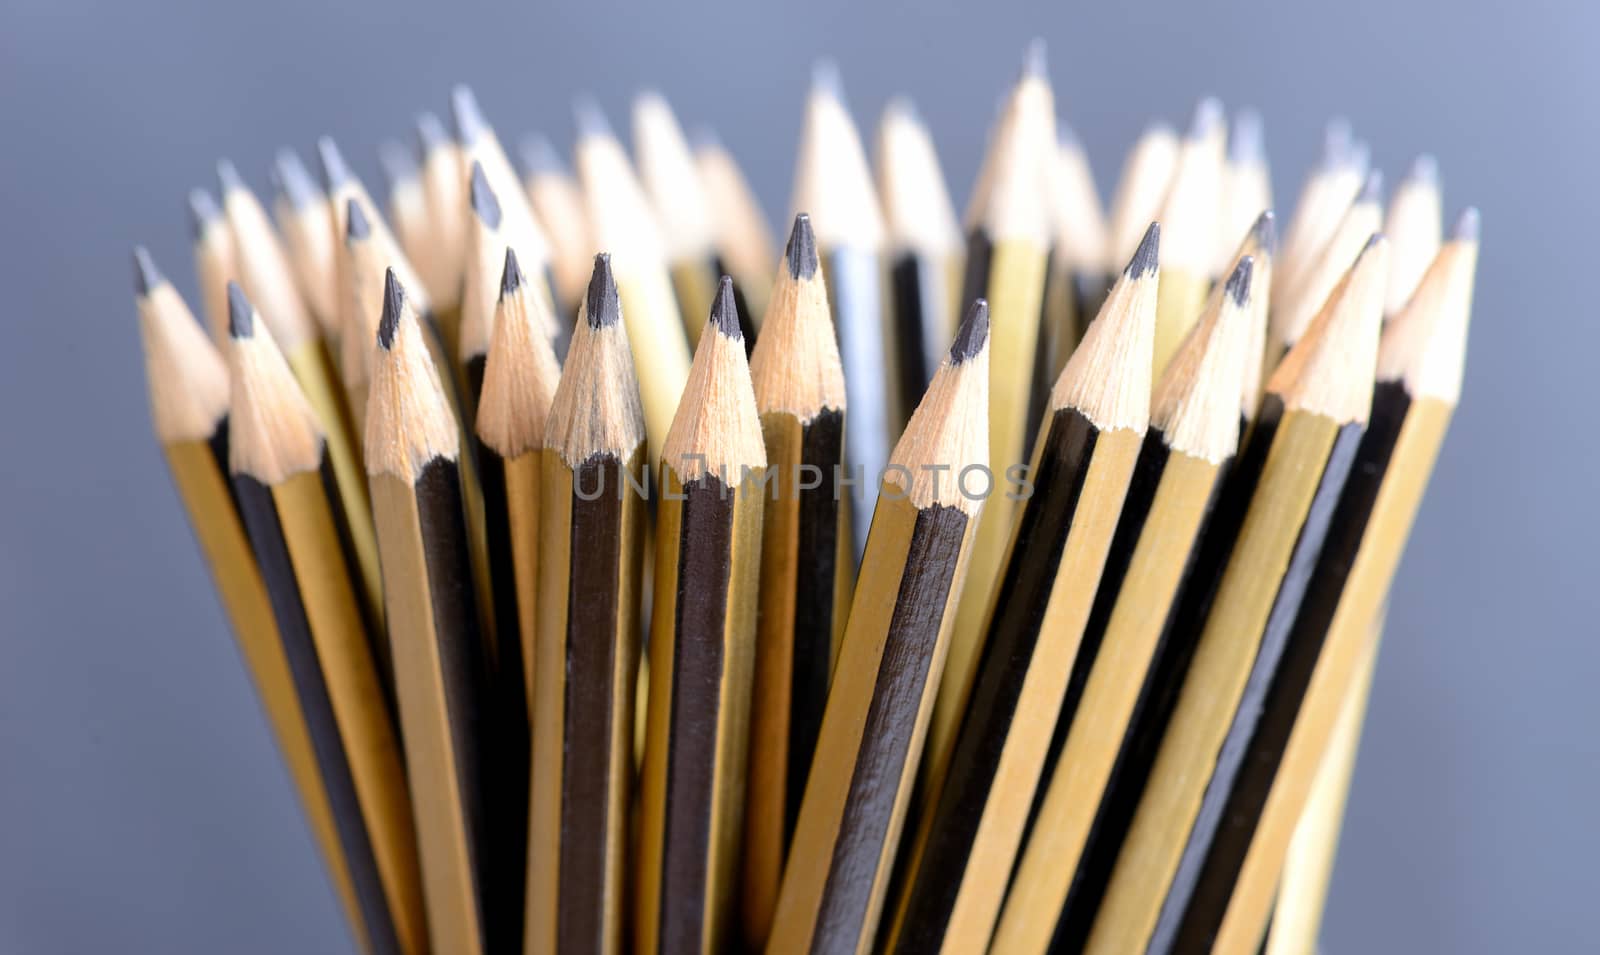 a bunch of pencils ready for work on grey background